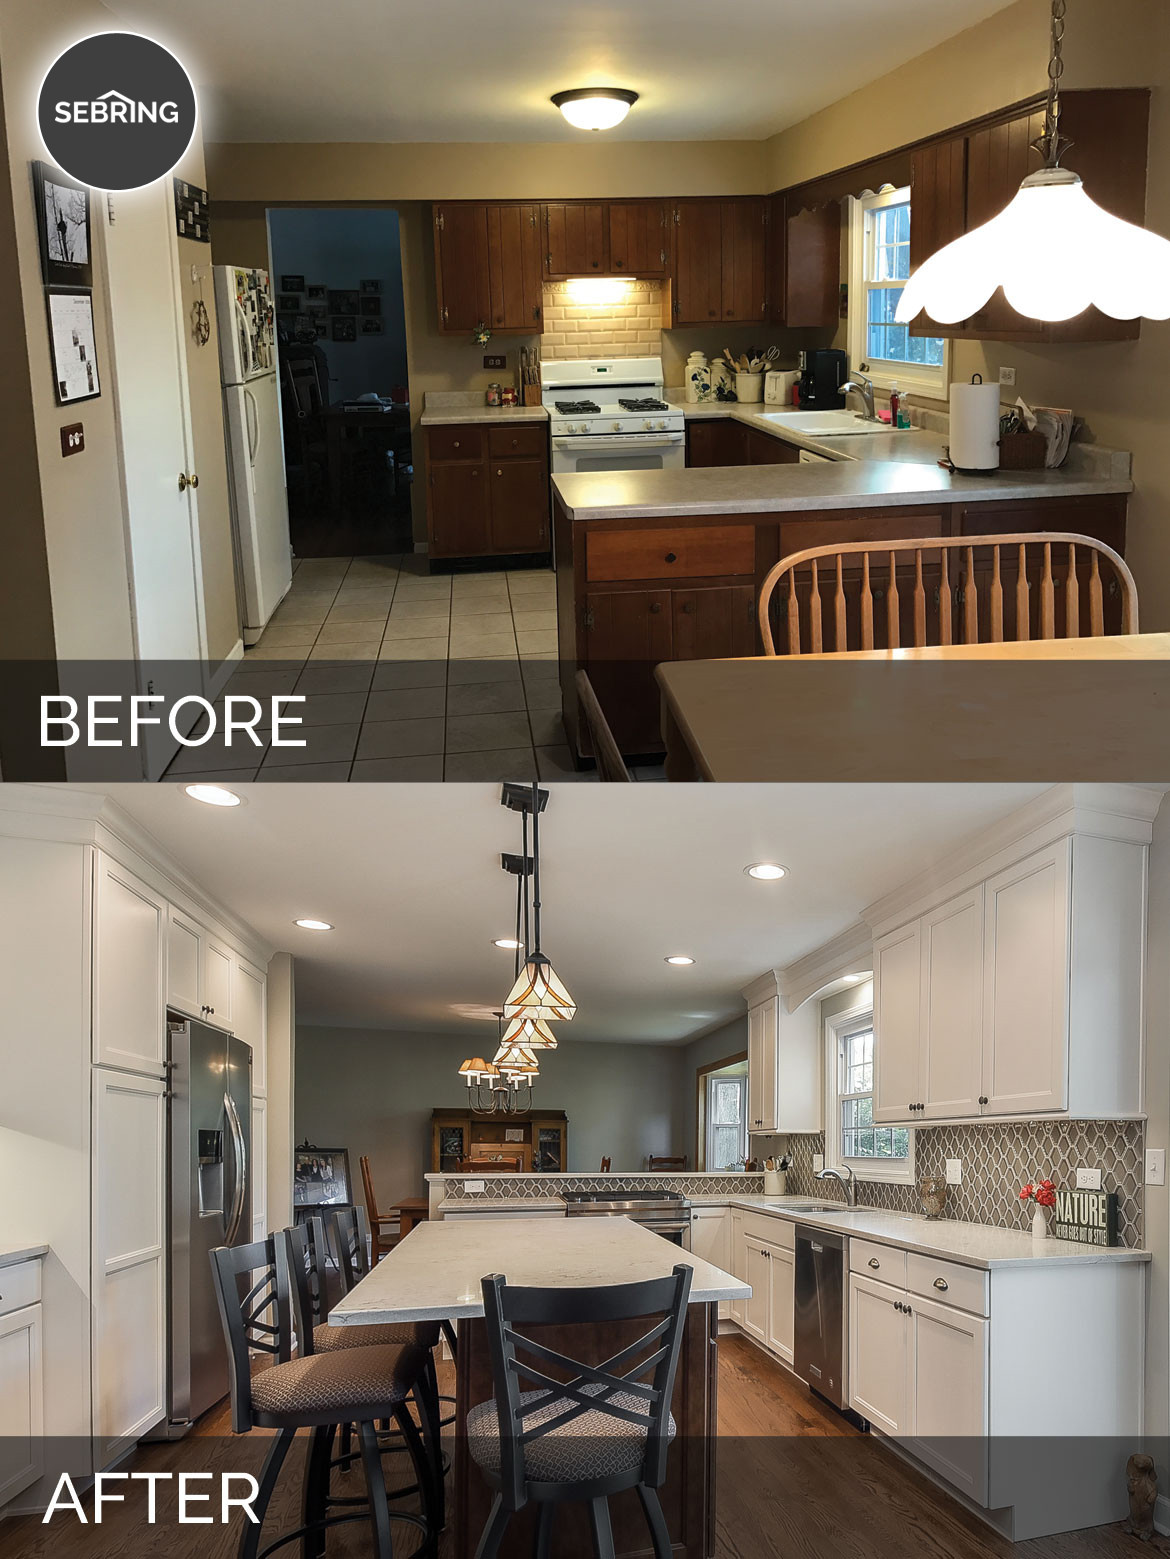 Remodeling Kitchen Before And After
 Scott & Ann s Kitchen Before & After